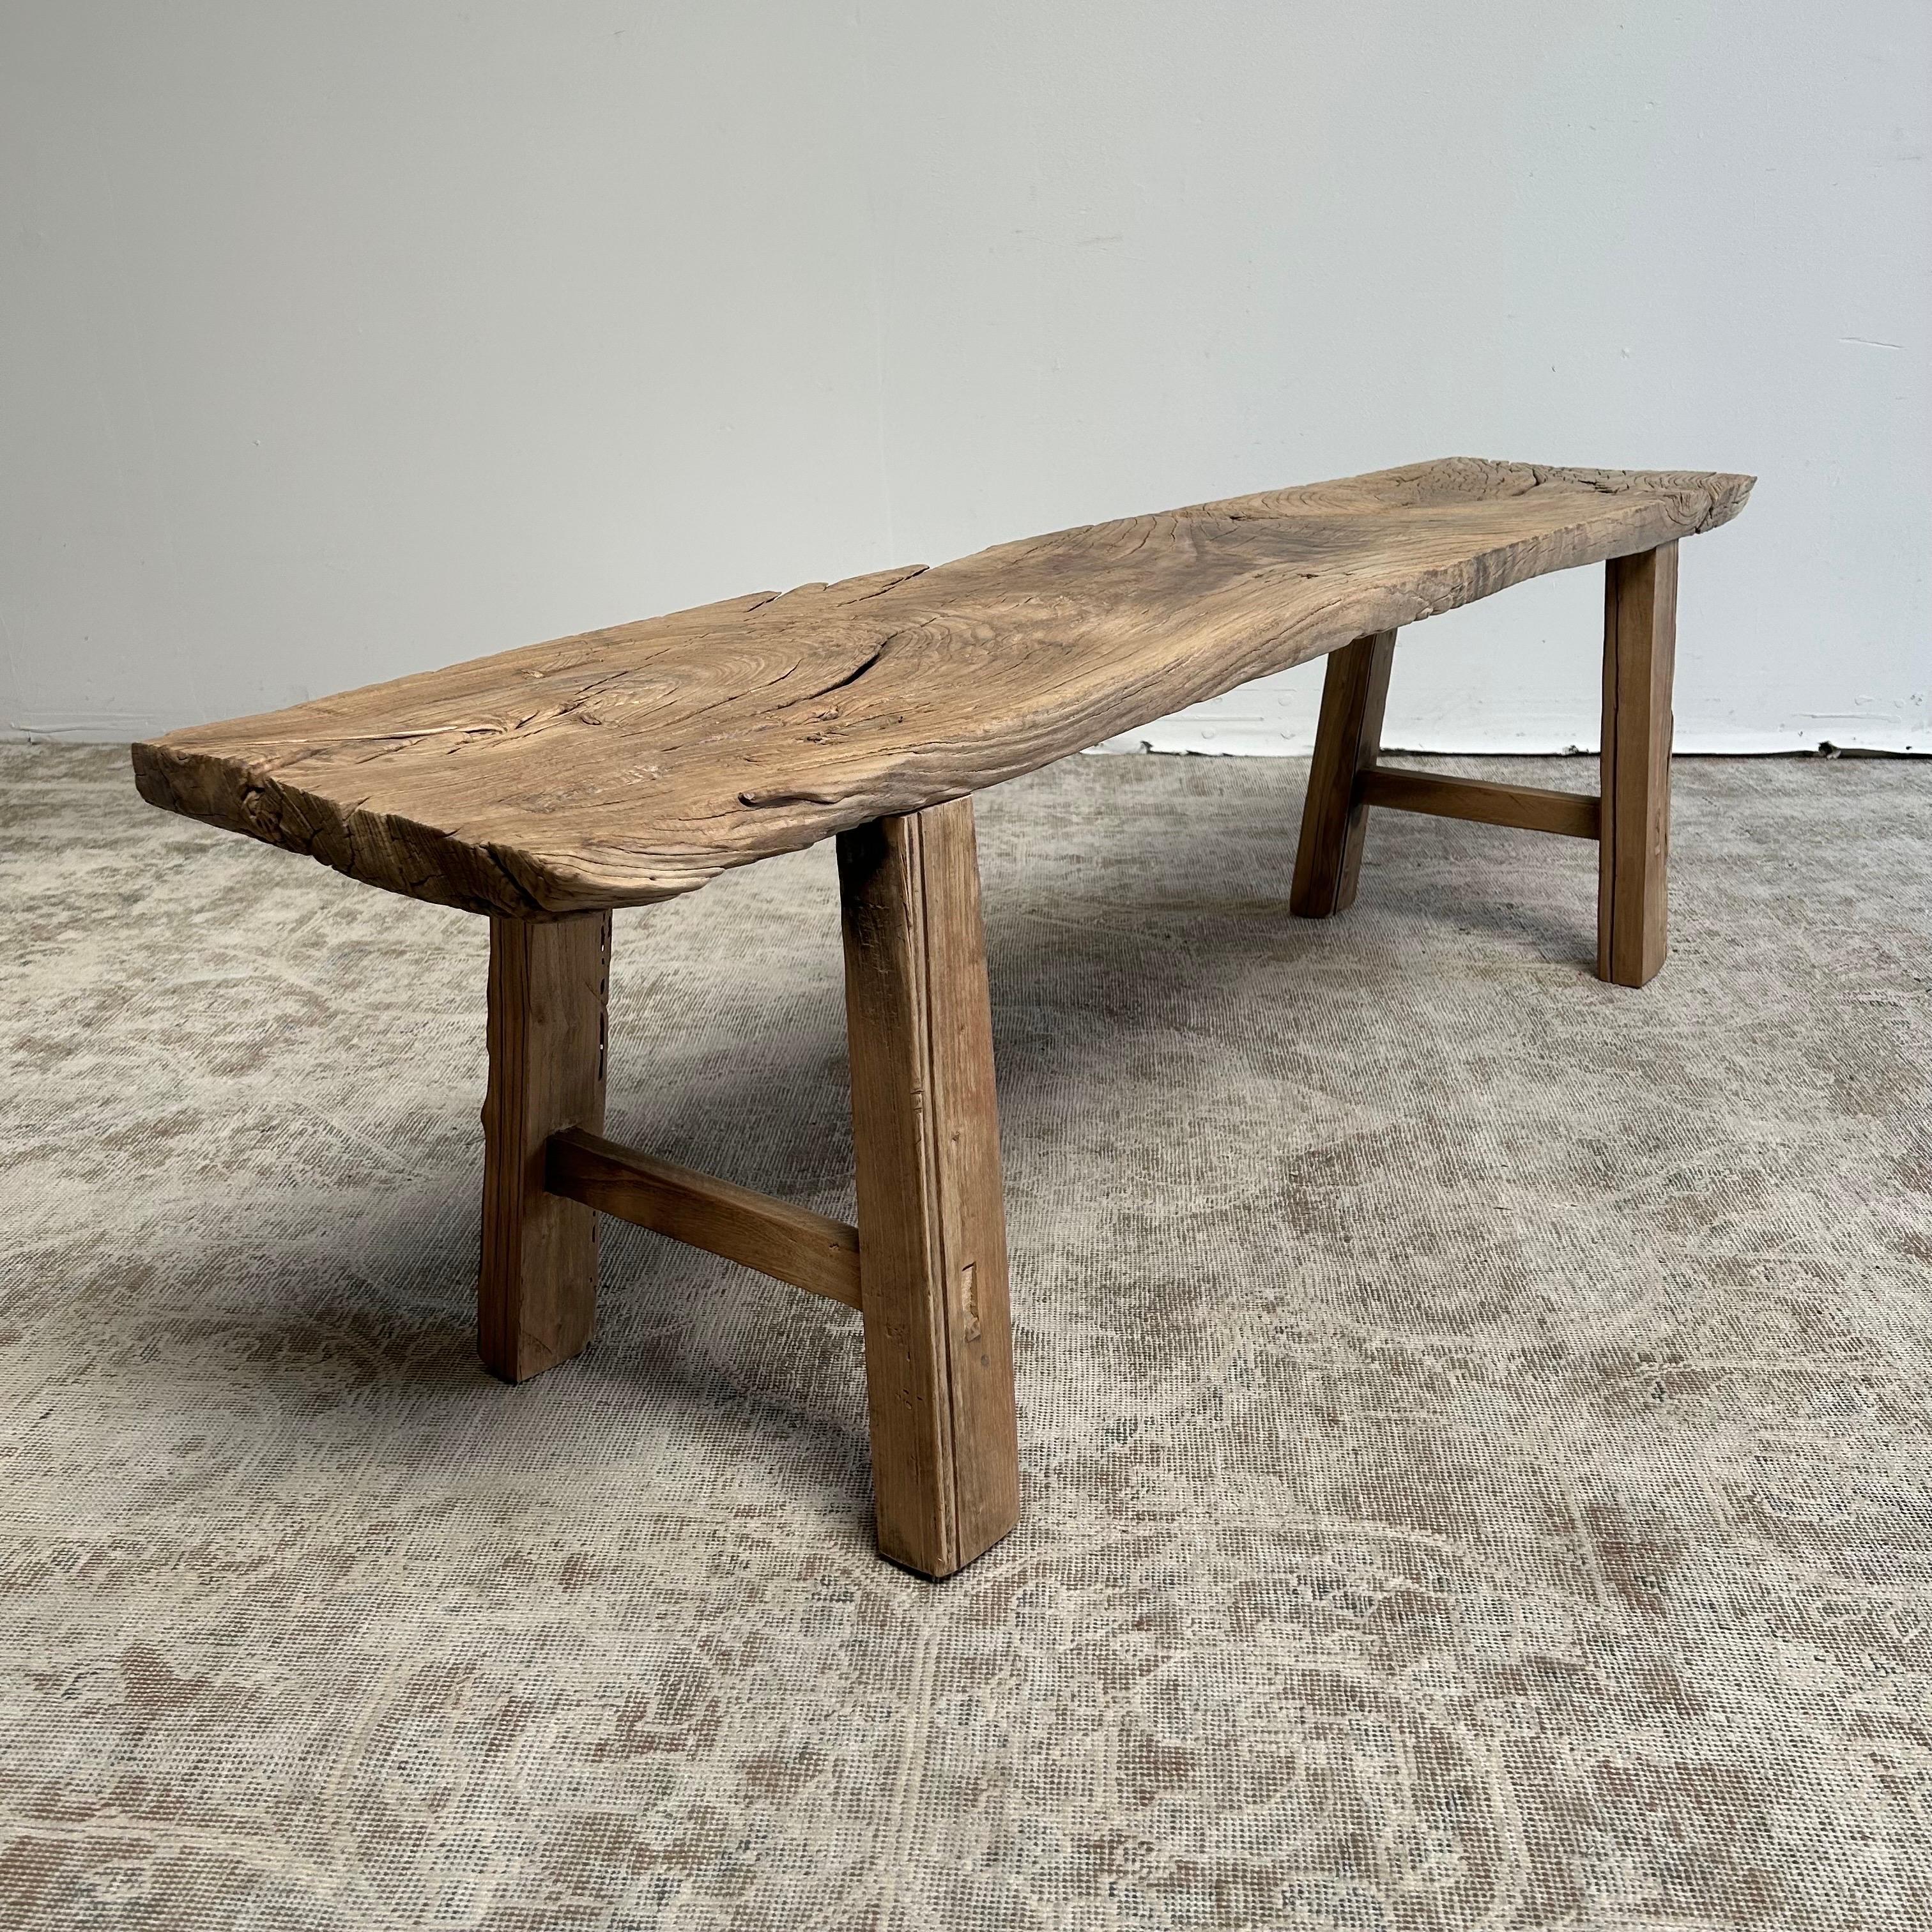 Vintage antique elm wood coffee table with beautiful antique weathered patina top
These are the real vintage antique elm wood coffee table! Beautiful antique patina, with weathering and age, these are solid and sturdy ready for daily use, use as a